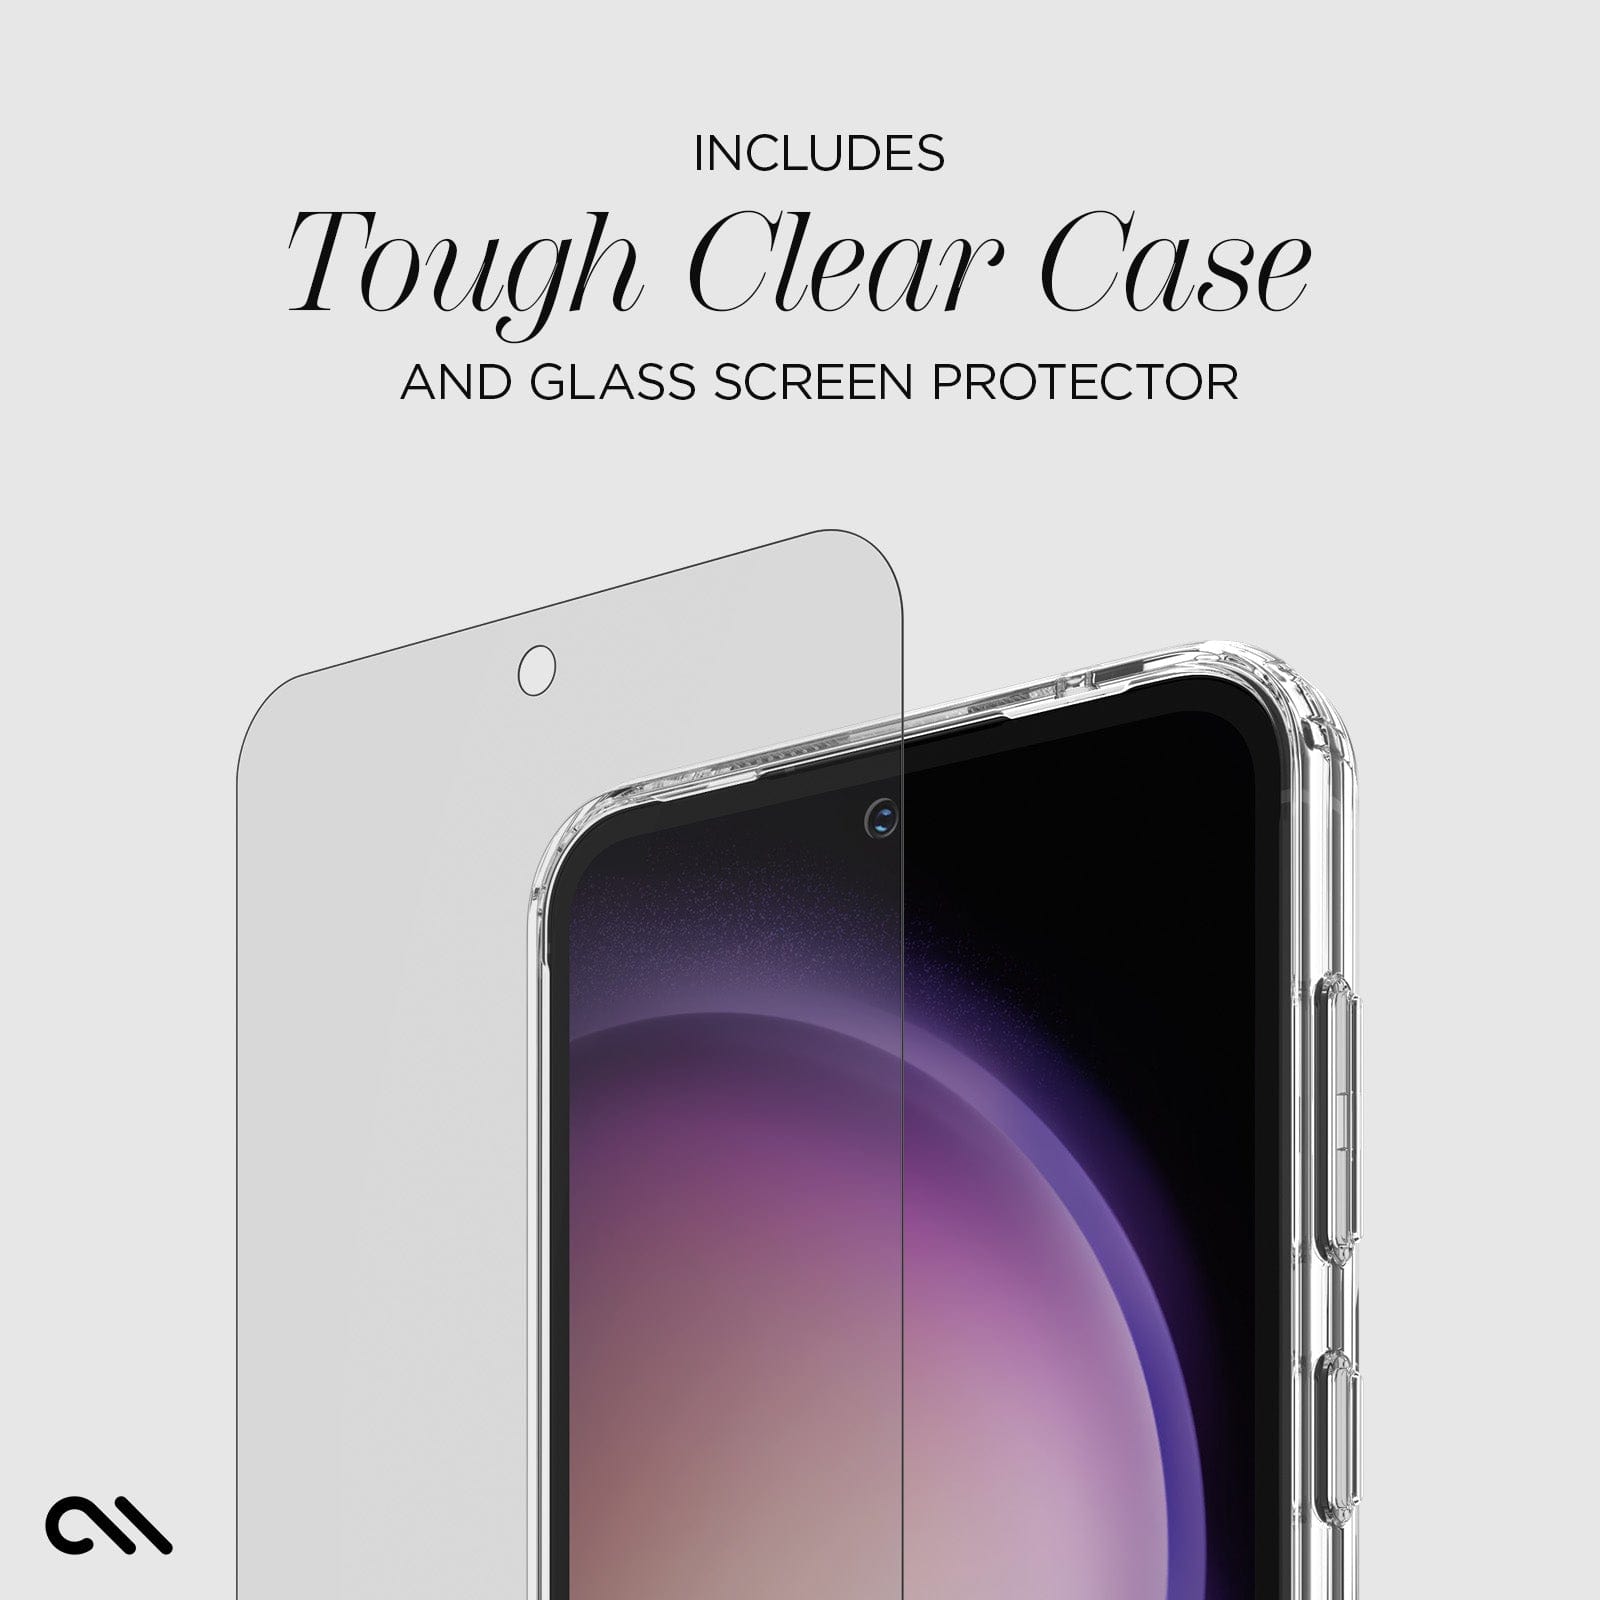 INCLUDES TOUGH CLEAR CASE AND GLASS SCREEN PROTECTOR